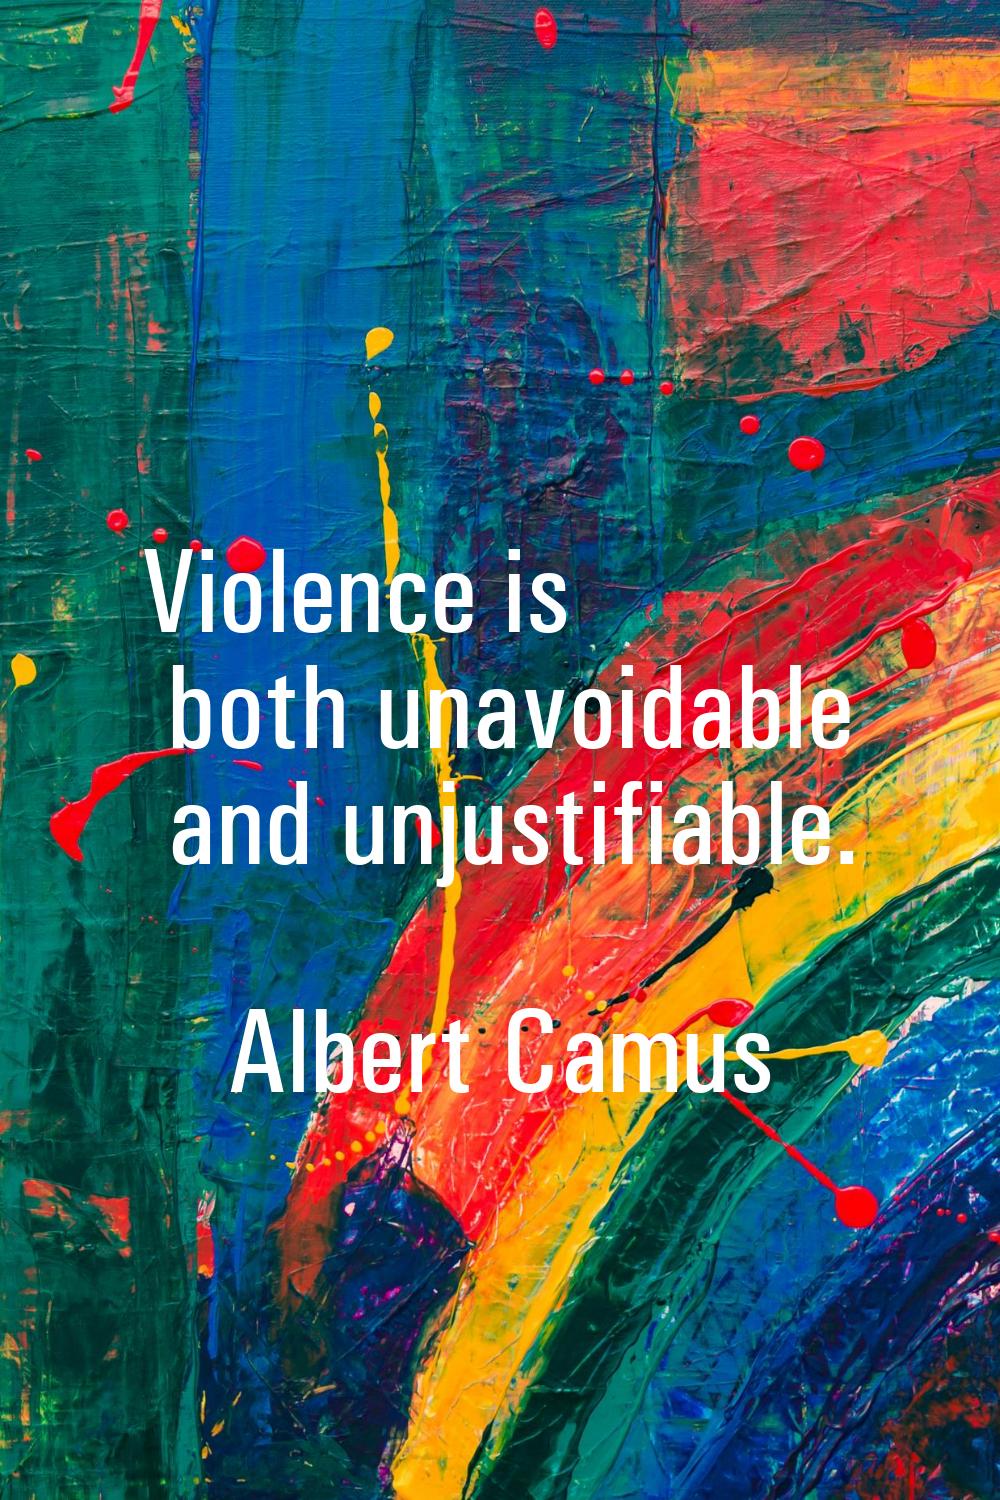 Violence is both unavoidable and unjustifiable.